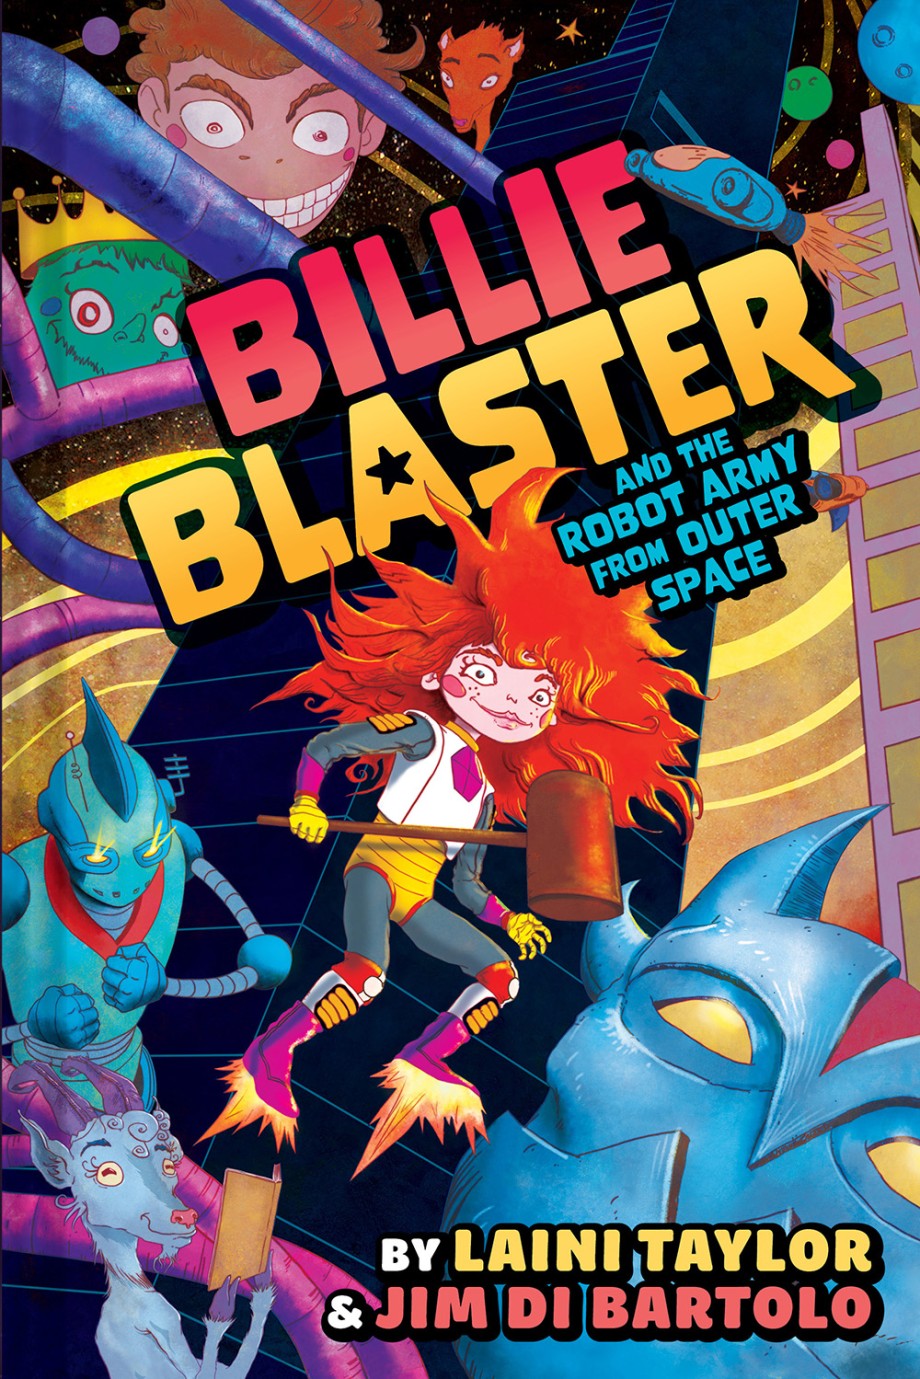 Billie Blaster and the Robot Army from Outer Space A Graphic Novel